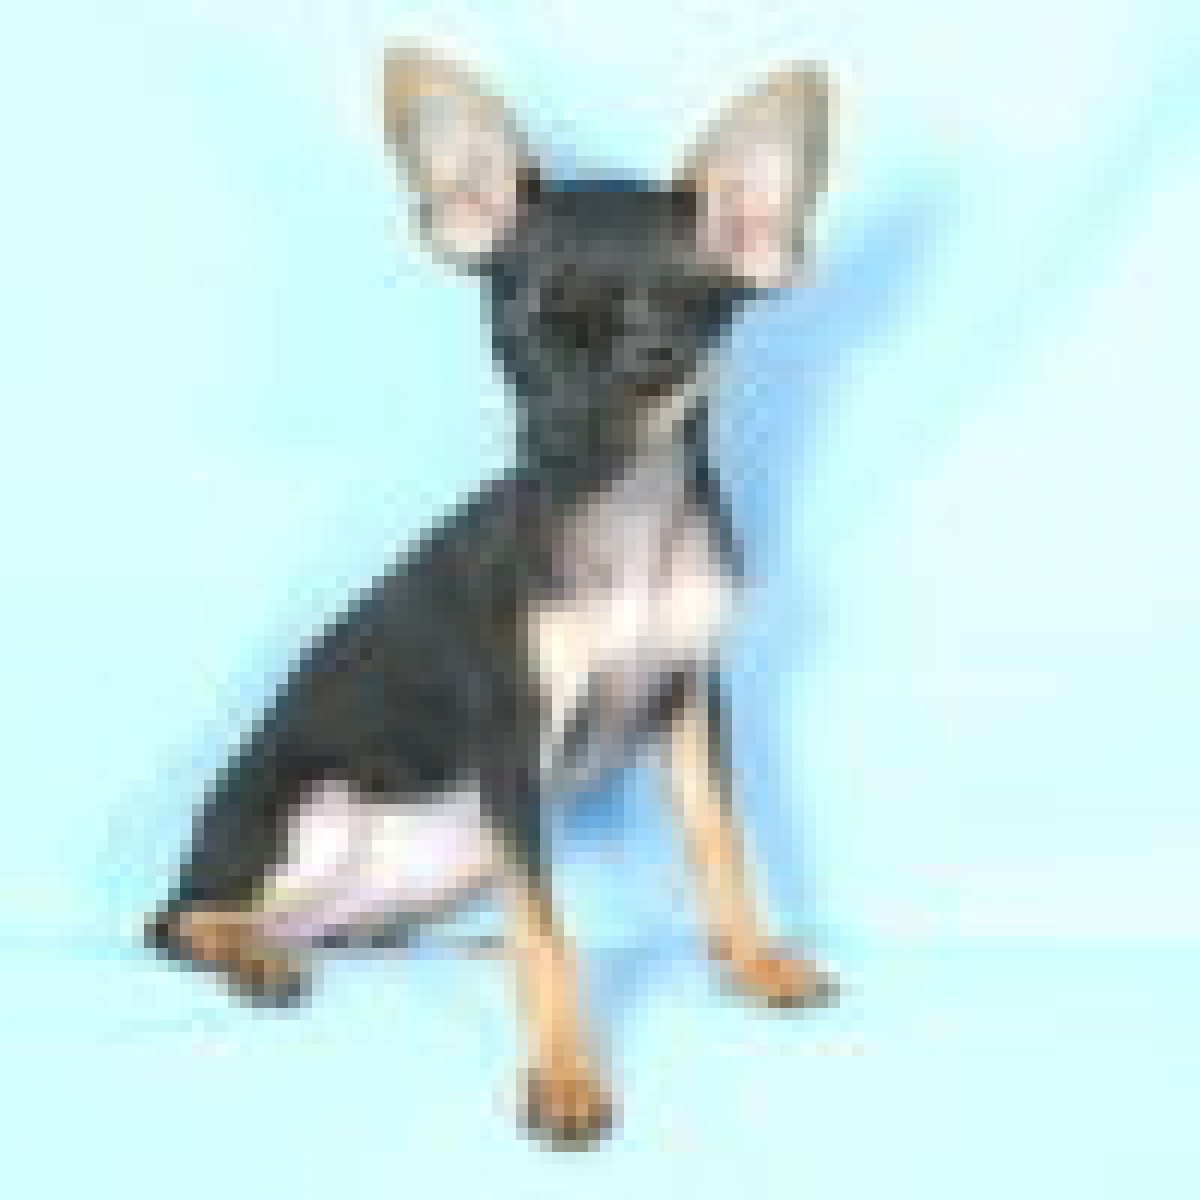 How Can I Find Russian Toy Terrier In Uk